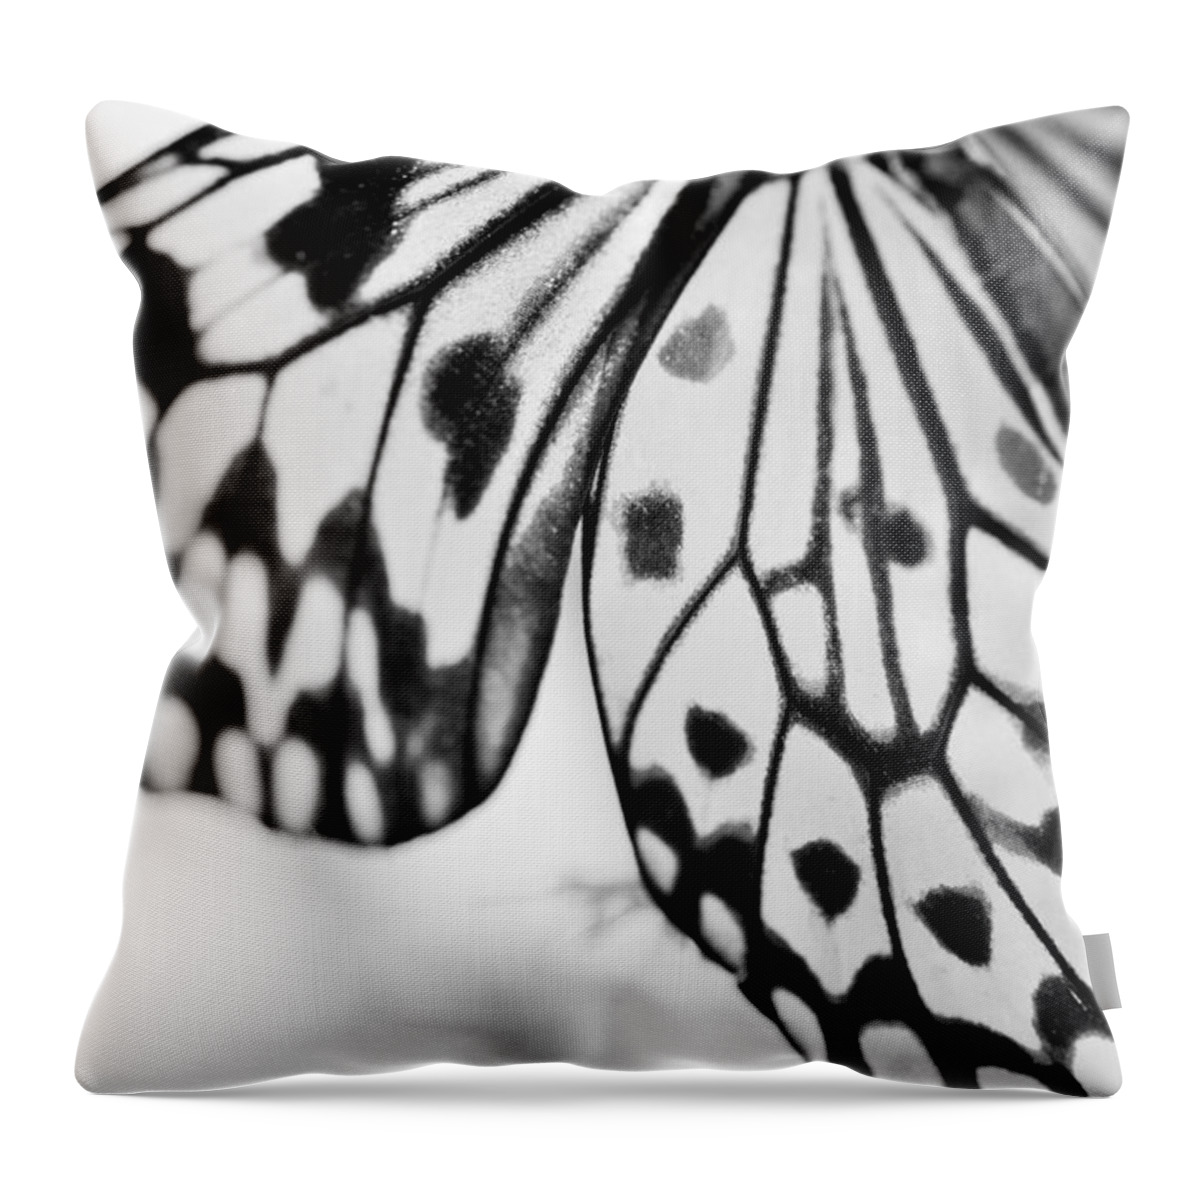 Butterfly Wings Throw Pillow featuring the photograph Butterfly Wings 3 - Black And White by Marianna Mills